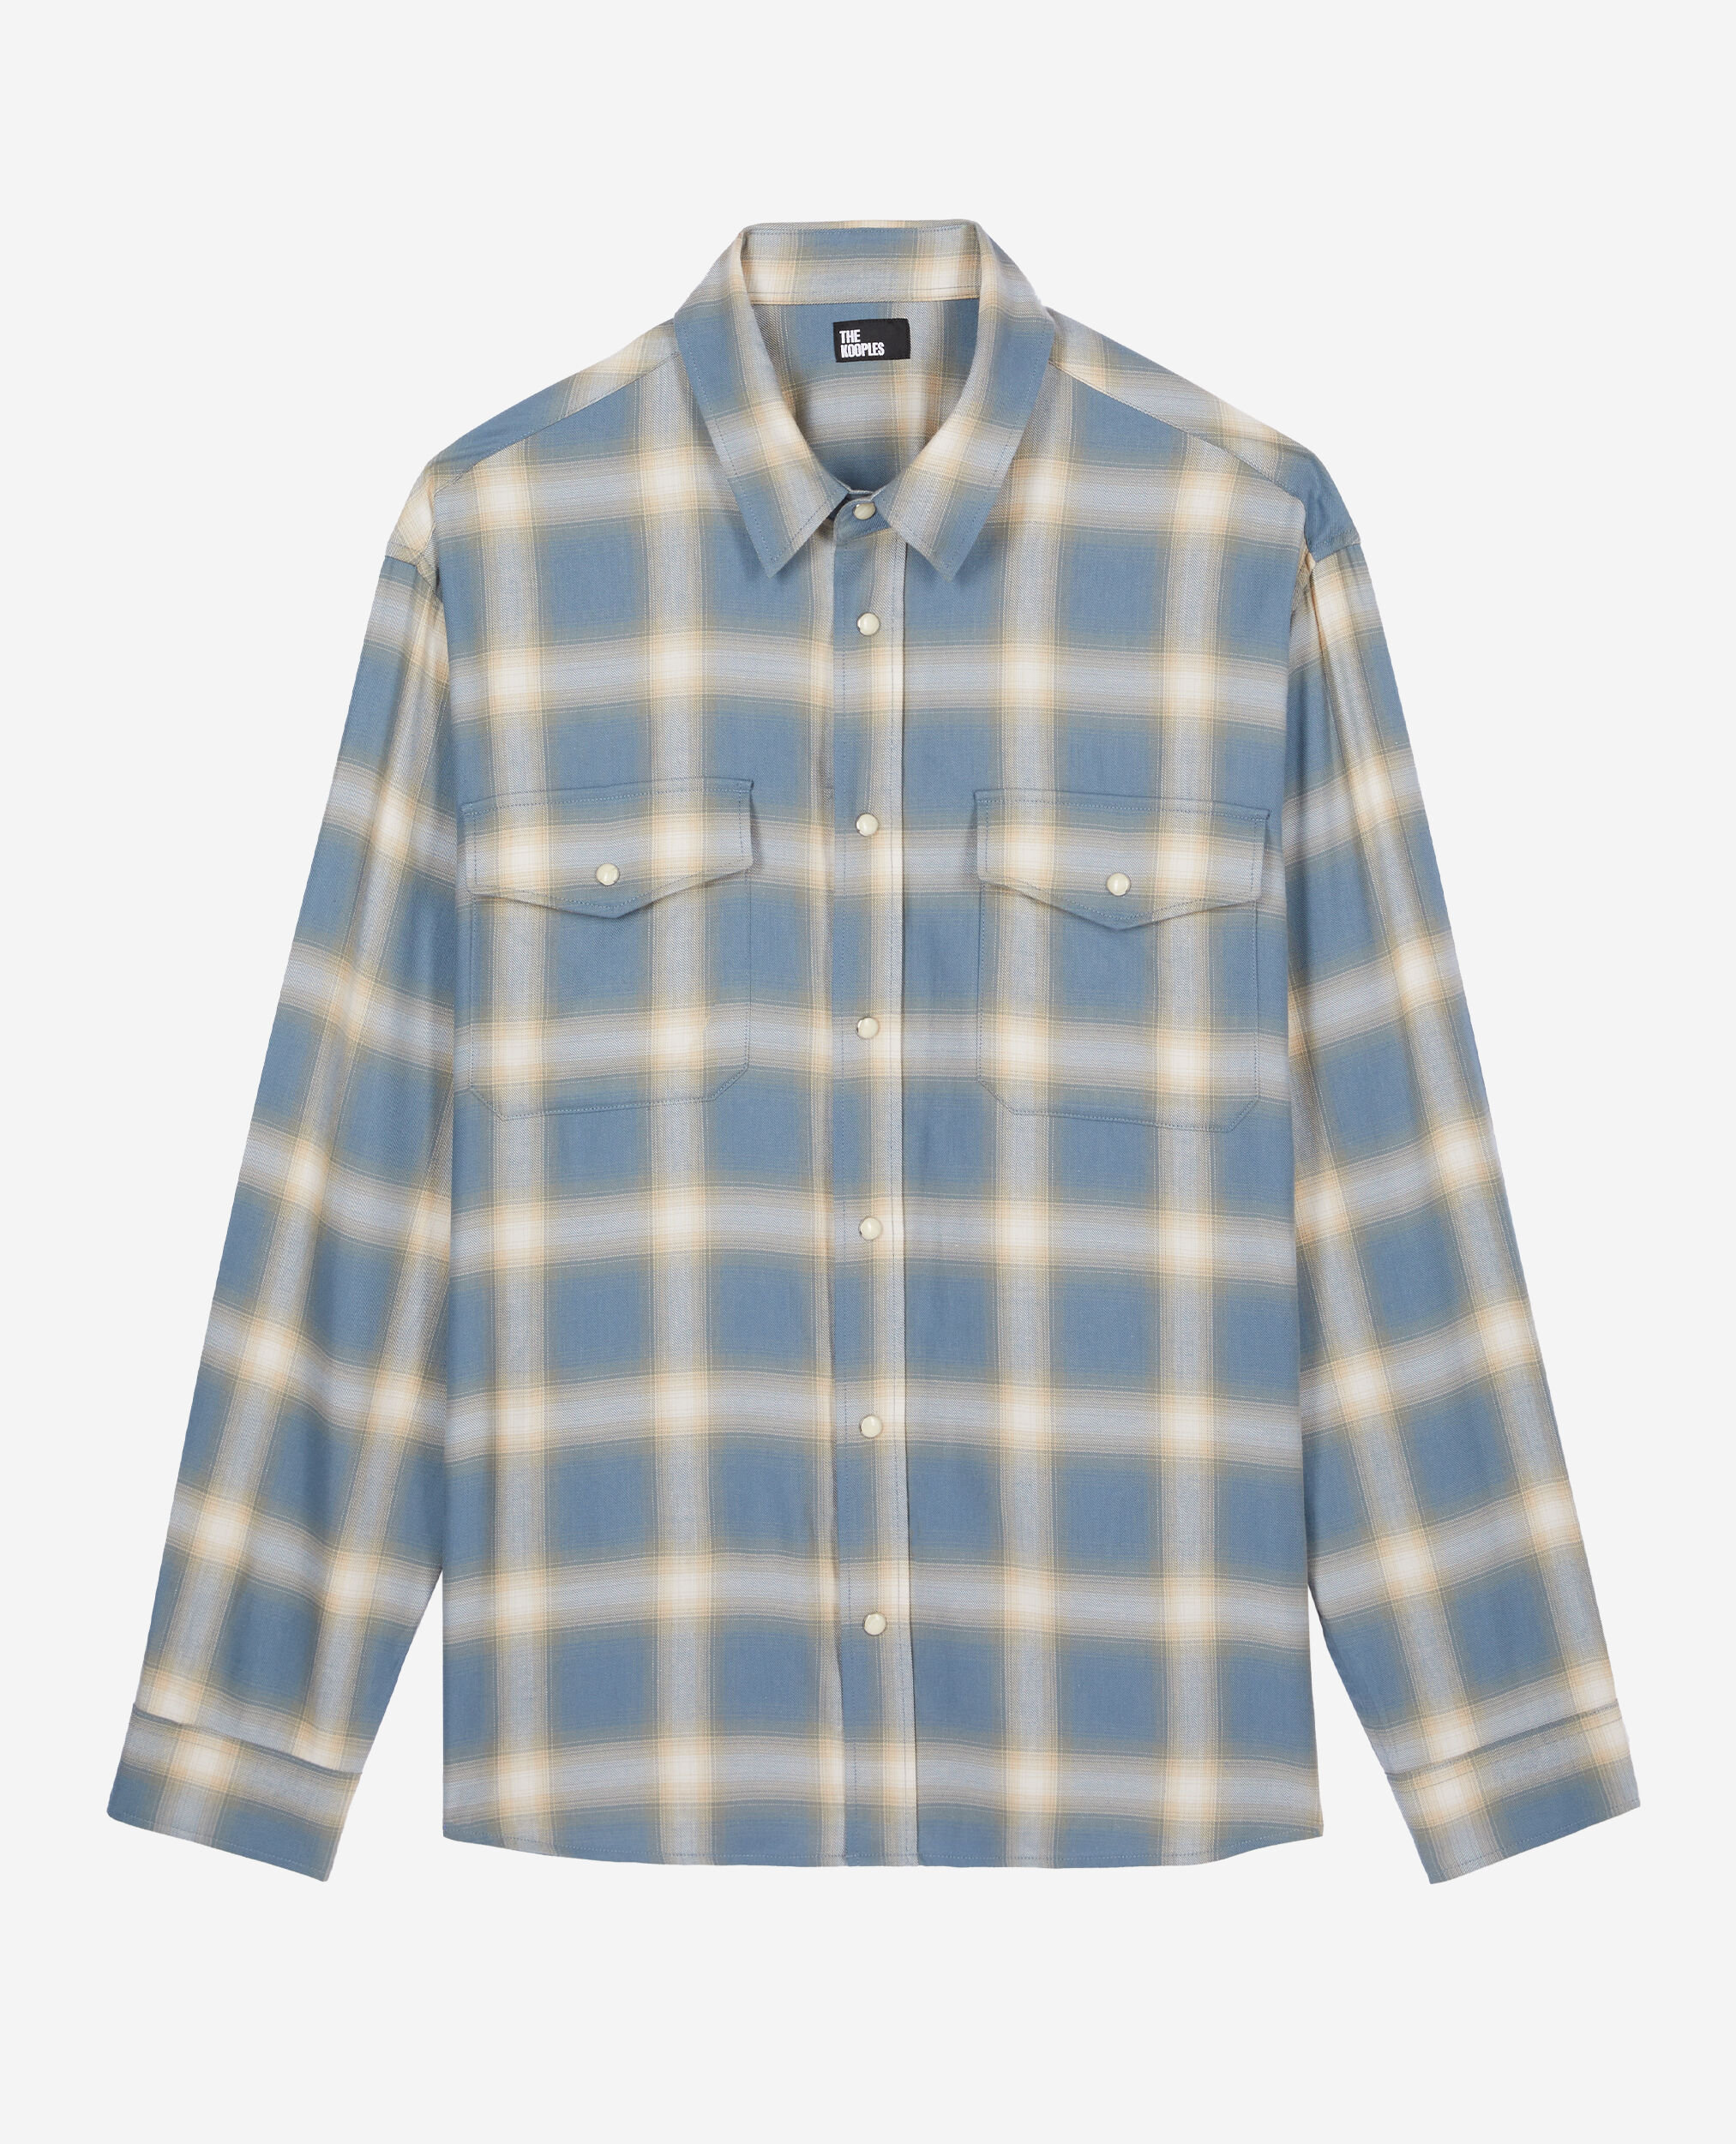 Checked shirt, BLUE GREY, hi-res image number null